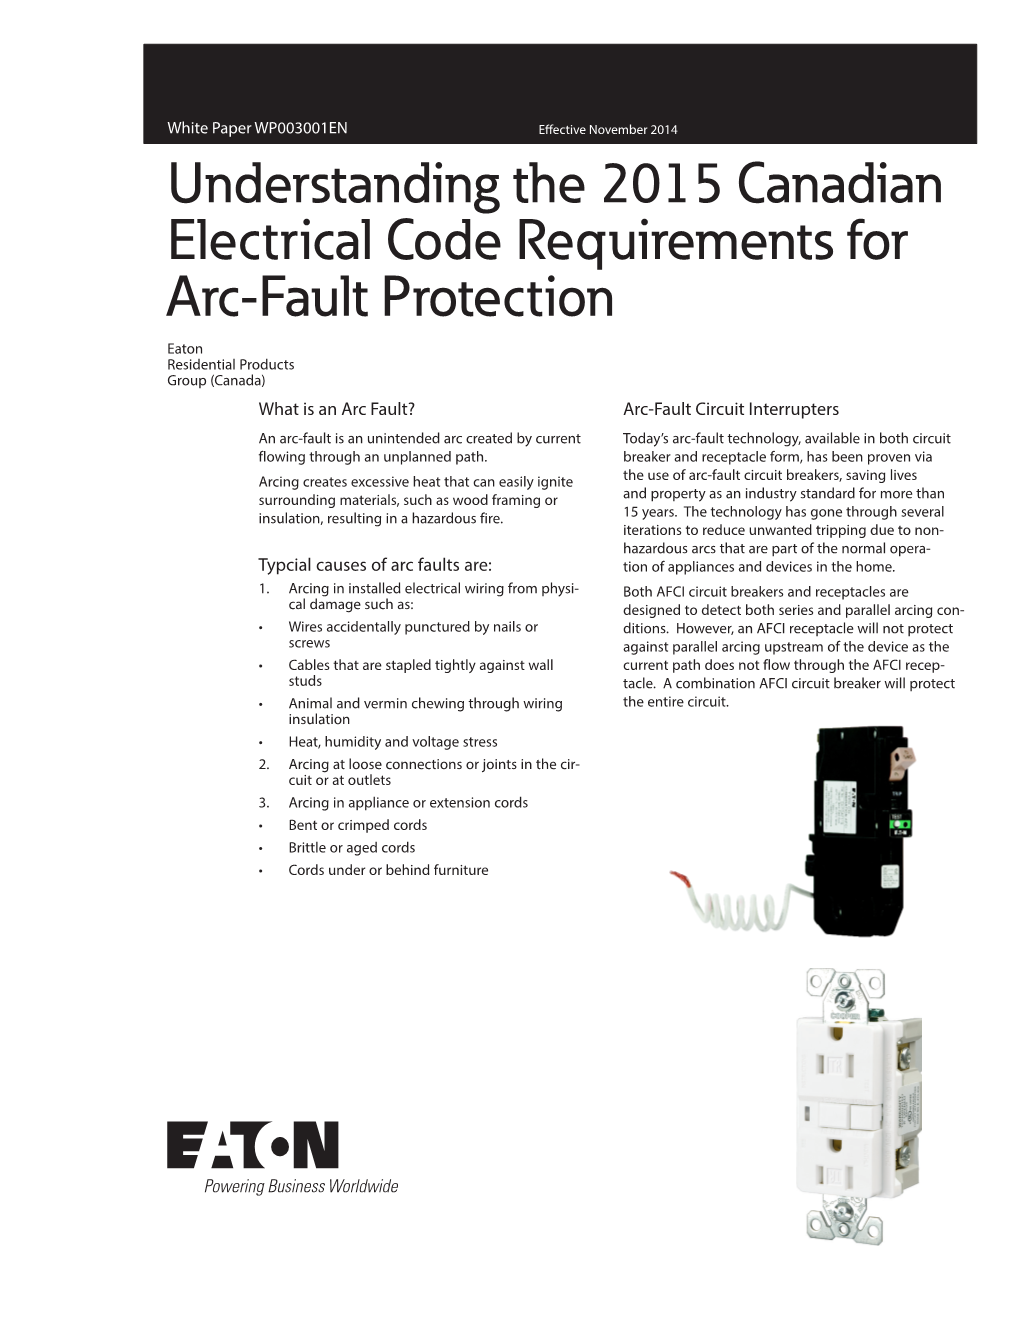 Understanding the 2015 Canadian Electrical Code Requirements For